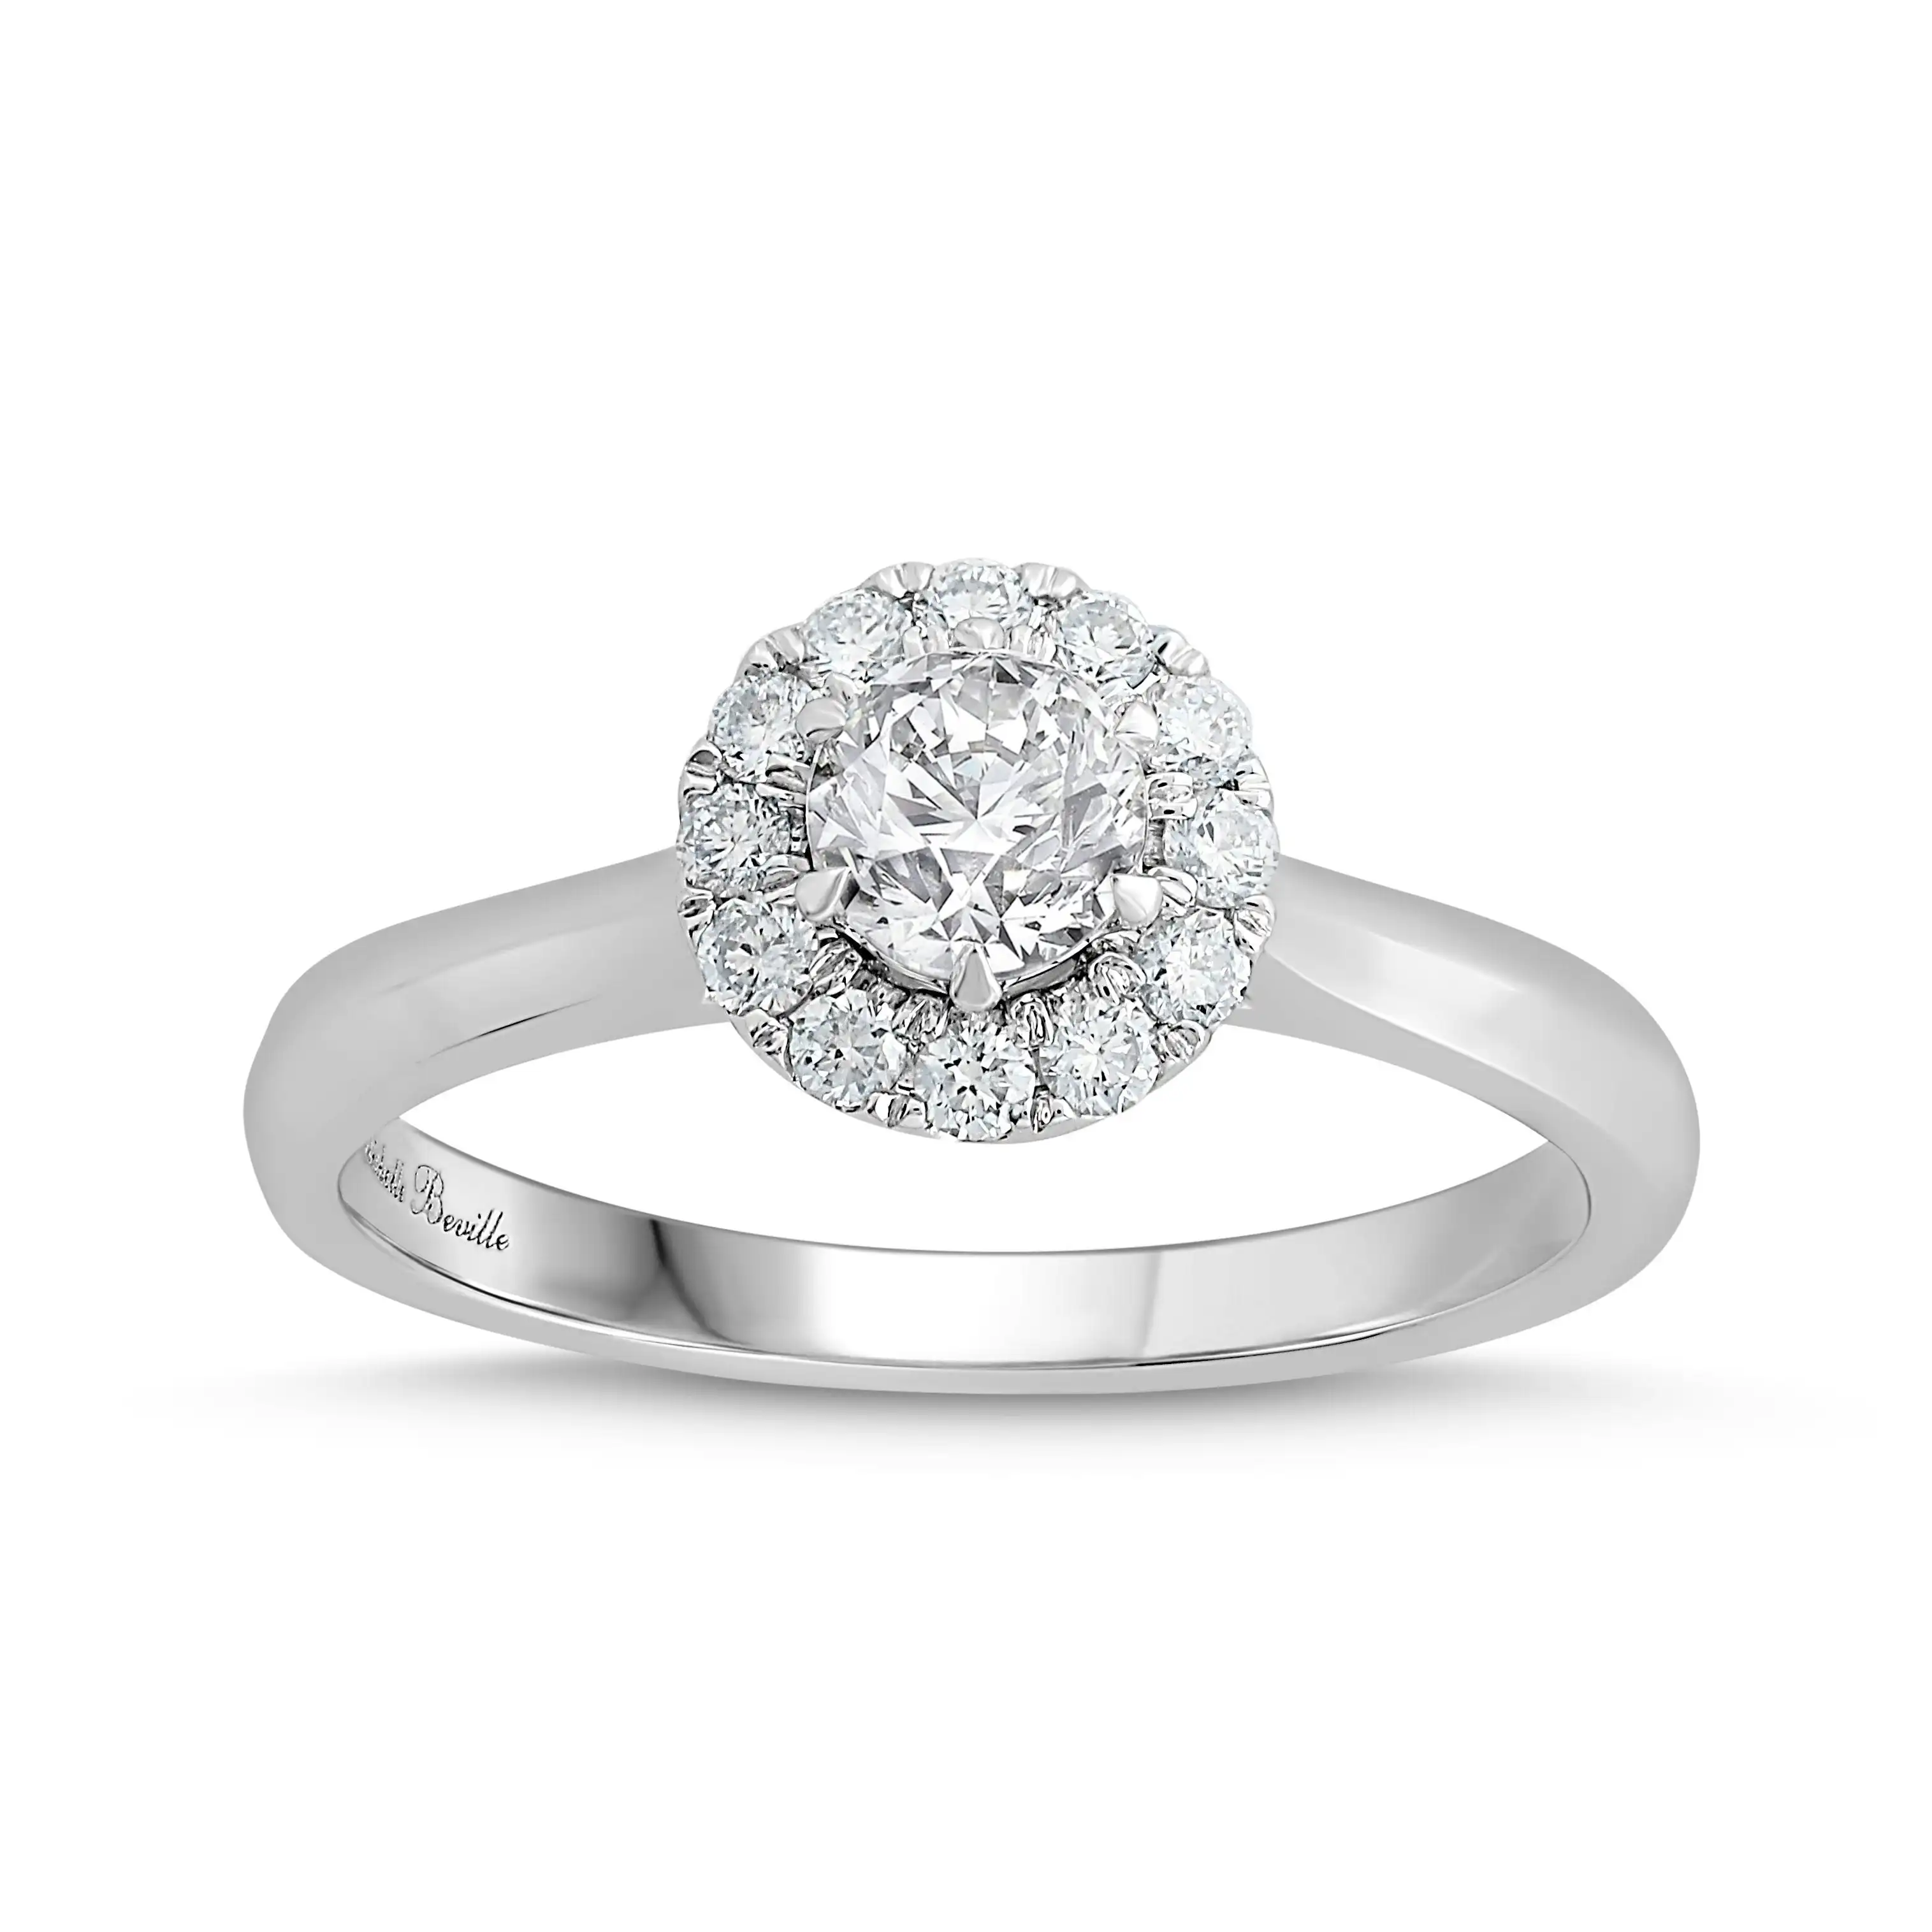 Love by Michelle Beville Halo Solitaire Ring with 0.65ct of Diamonds in 18ct White Gold